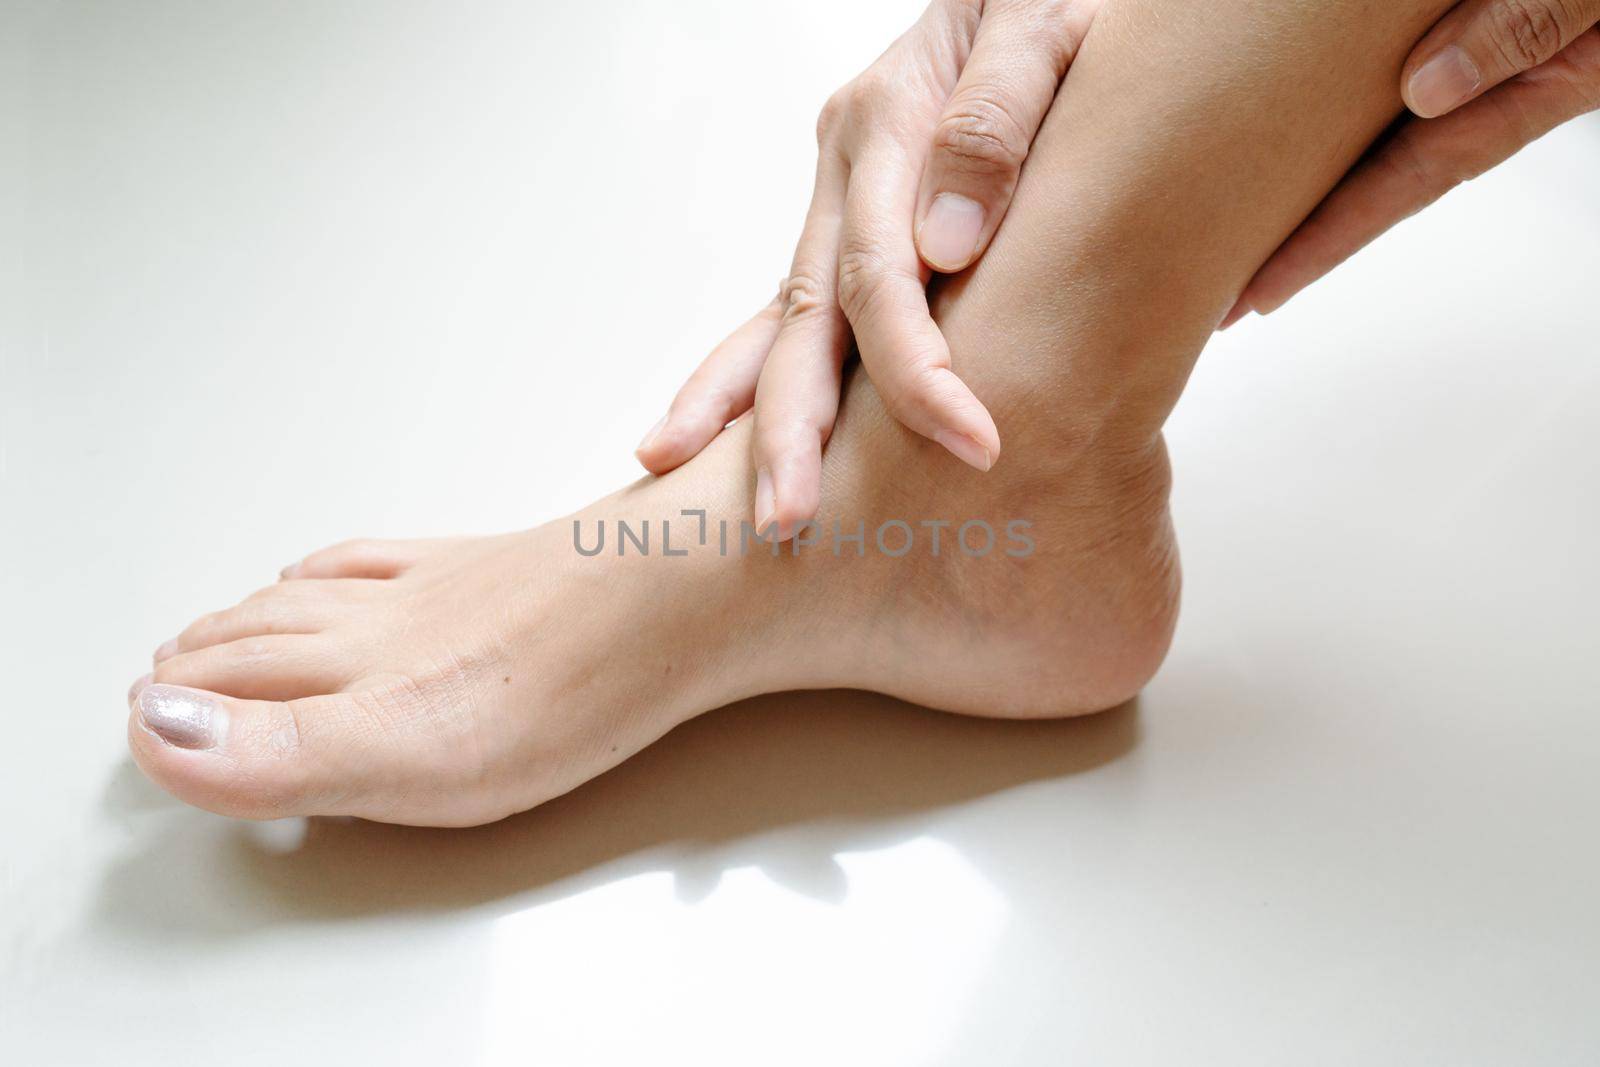 women leg ankle injury/painful, women touch the pain ankle leg by psodaz